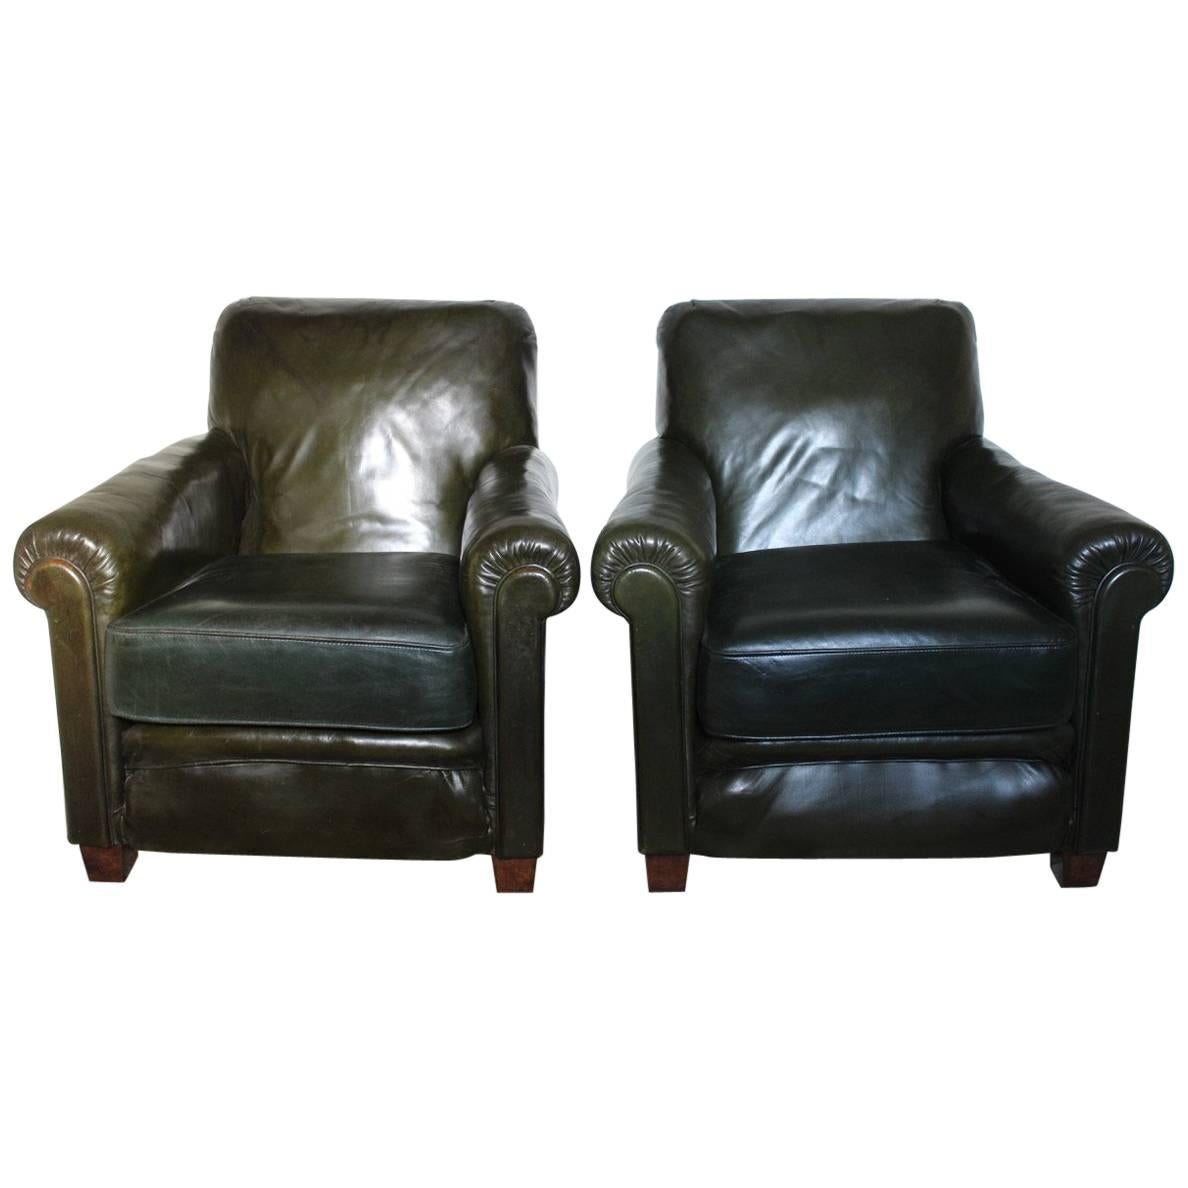 Pair of 1940s Vintage Green Leather Armchairs